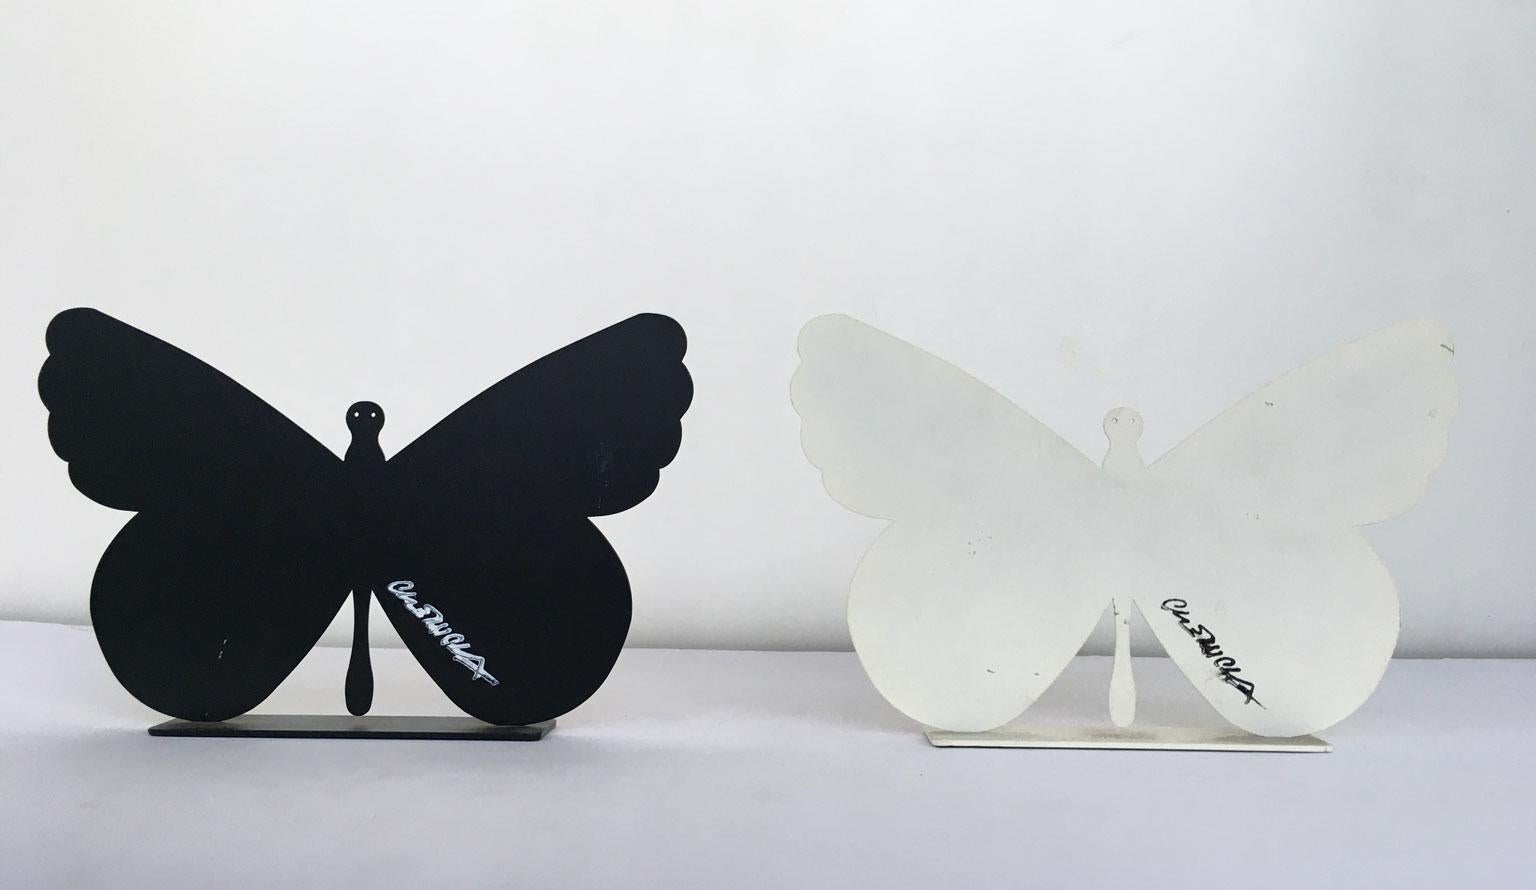 Italy 1980 Bruno Chersicla Volavola Black Painted Metal Sculpture Butterfly For Sale 7